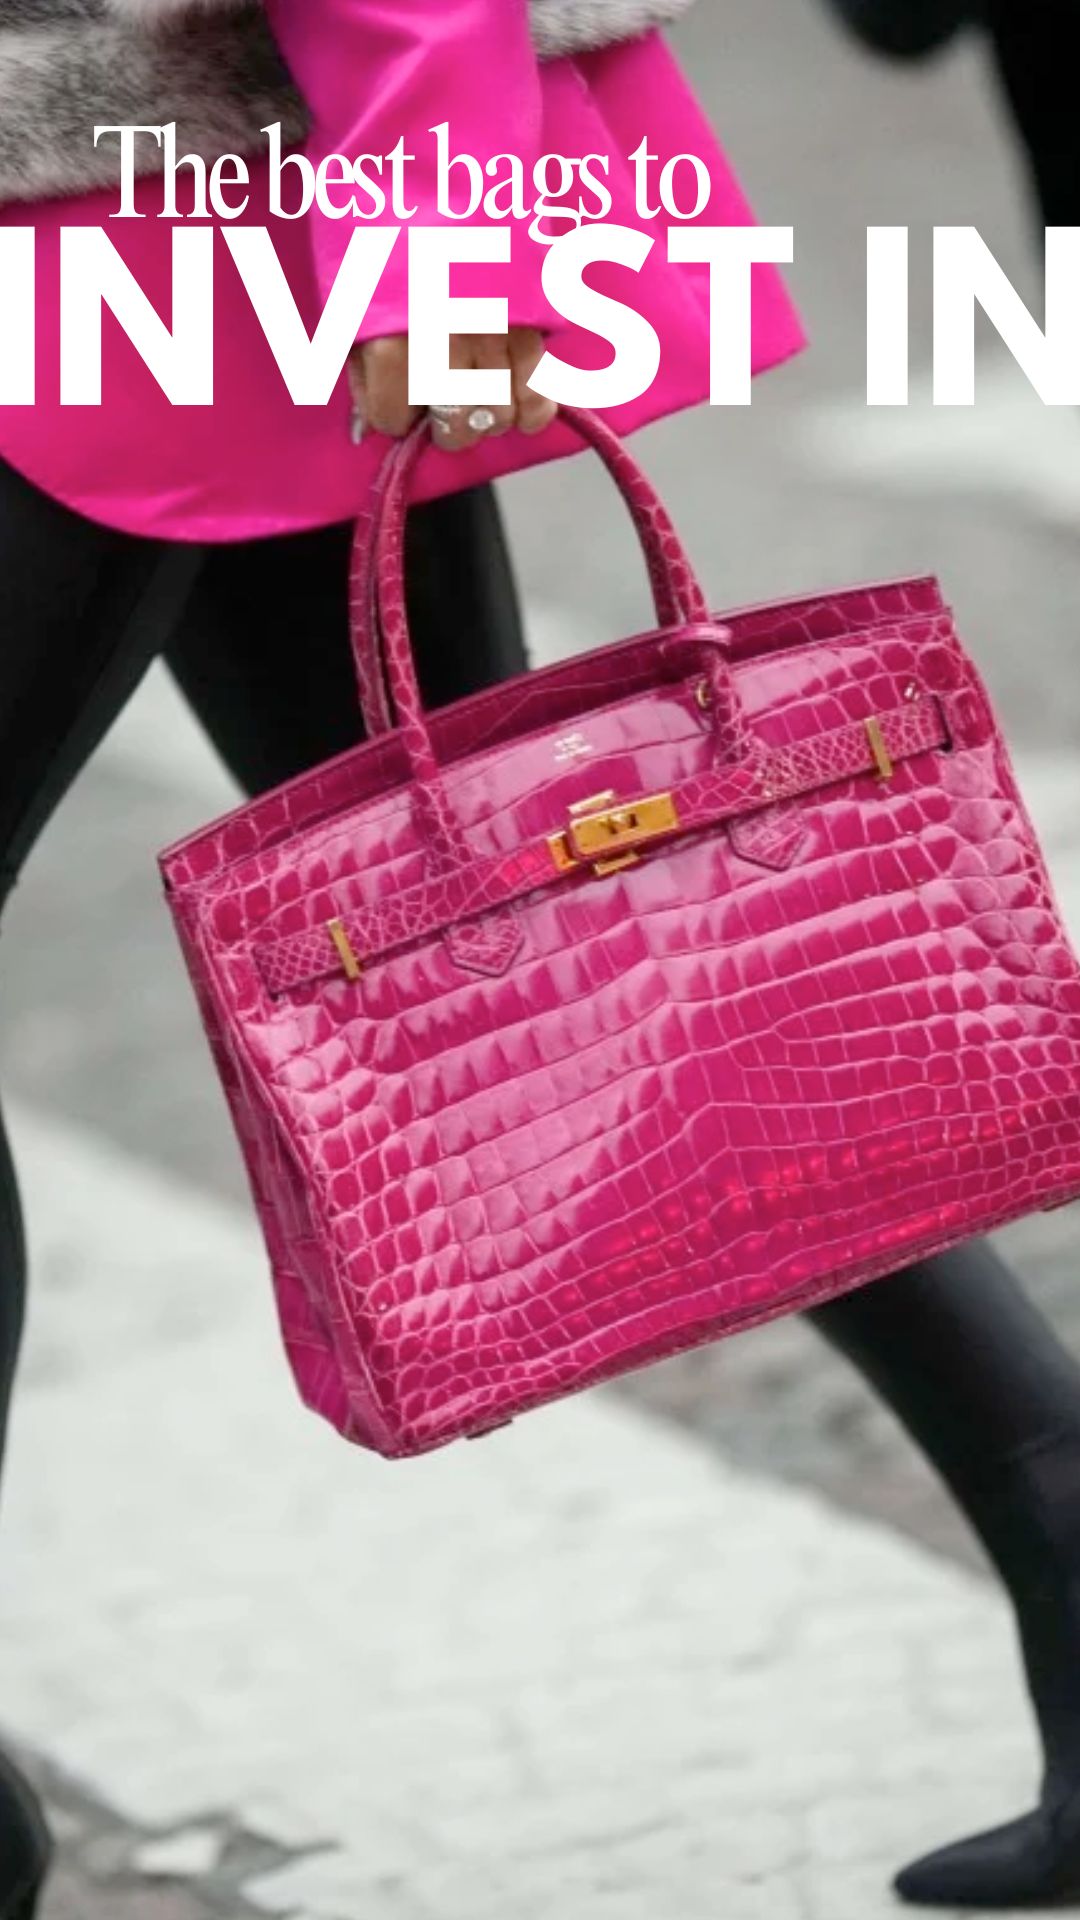 Luxury at Your Fingertips: The 5 Most Iconic Designer Handbags